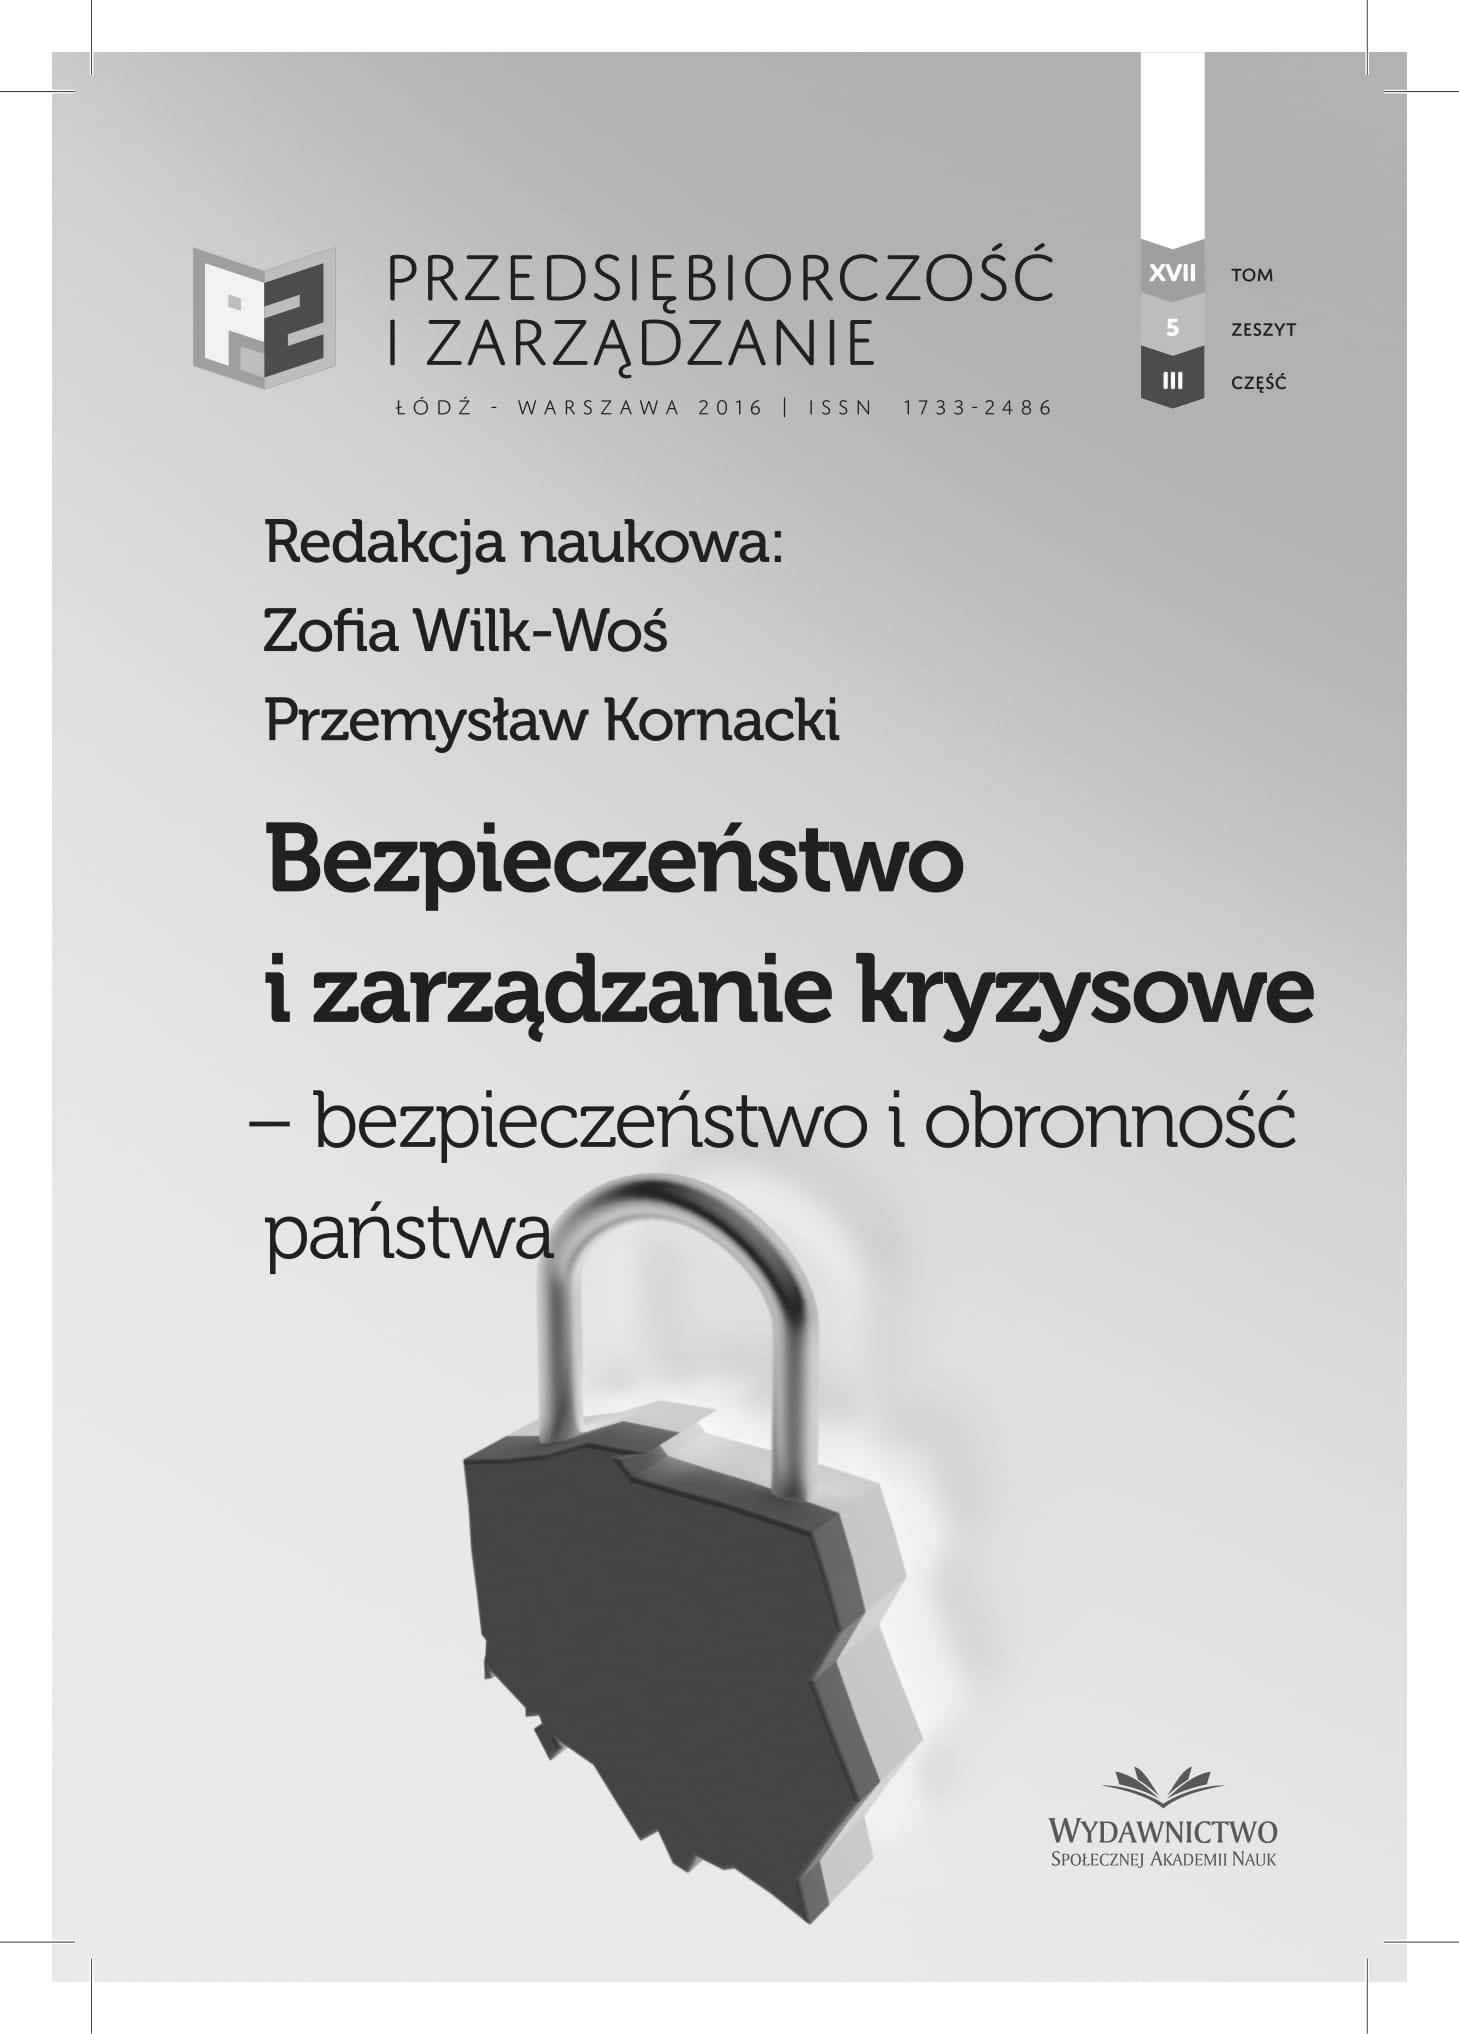 Preparations for Militarization in the Aspect of Legal Regulations in Poland Cover Image